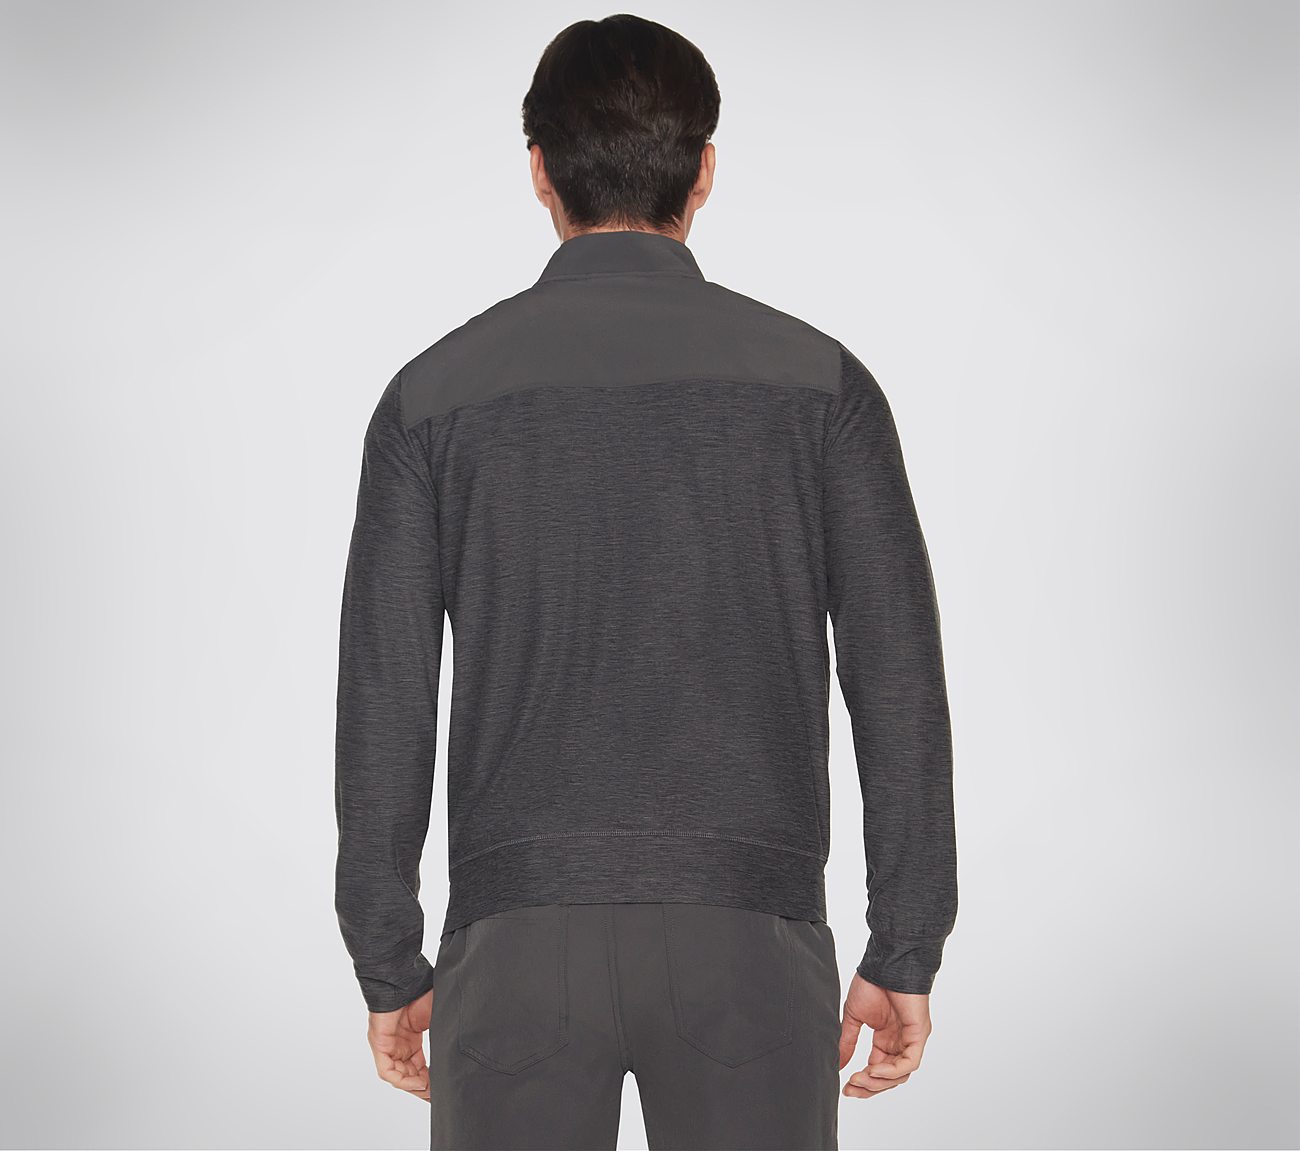 THE HOODLESS HOODIE ULTRA GO, BLACK/CHARCOAL Apparel Top View